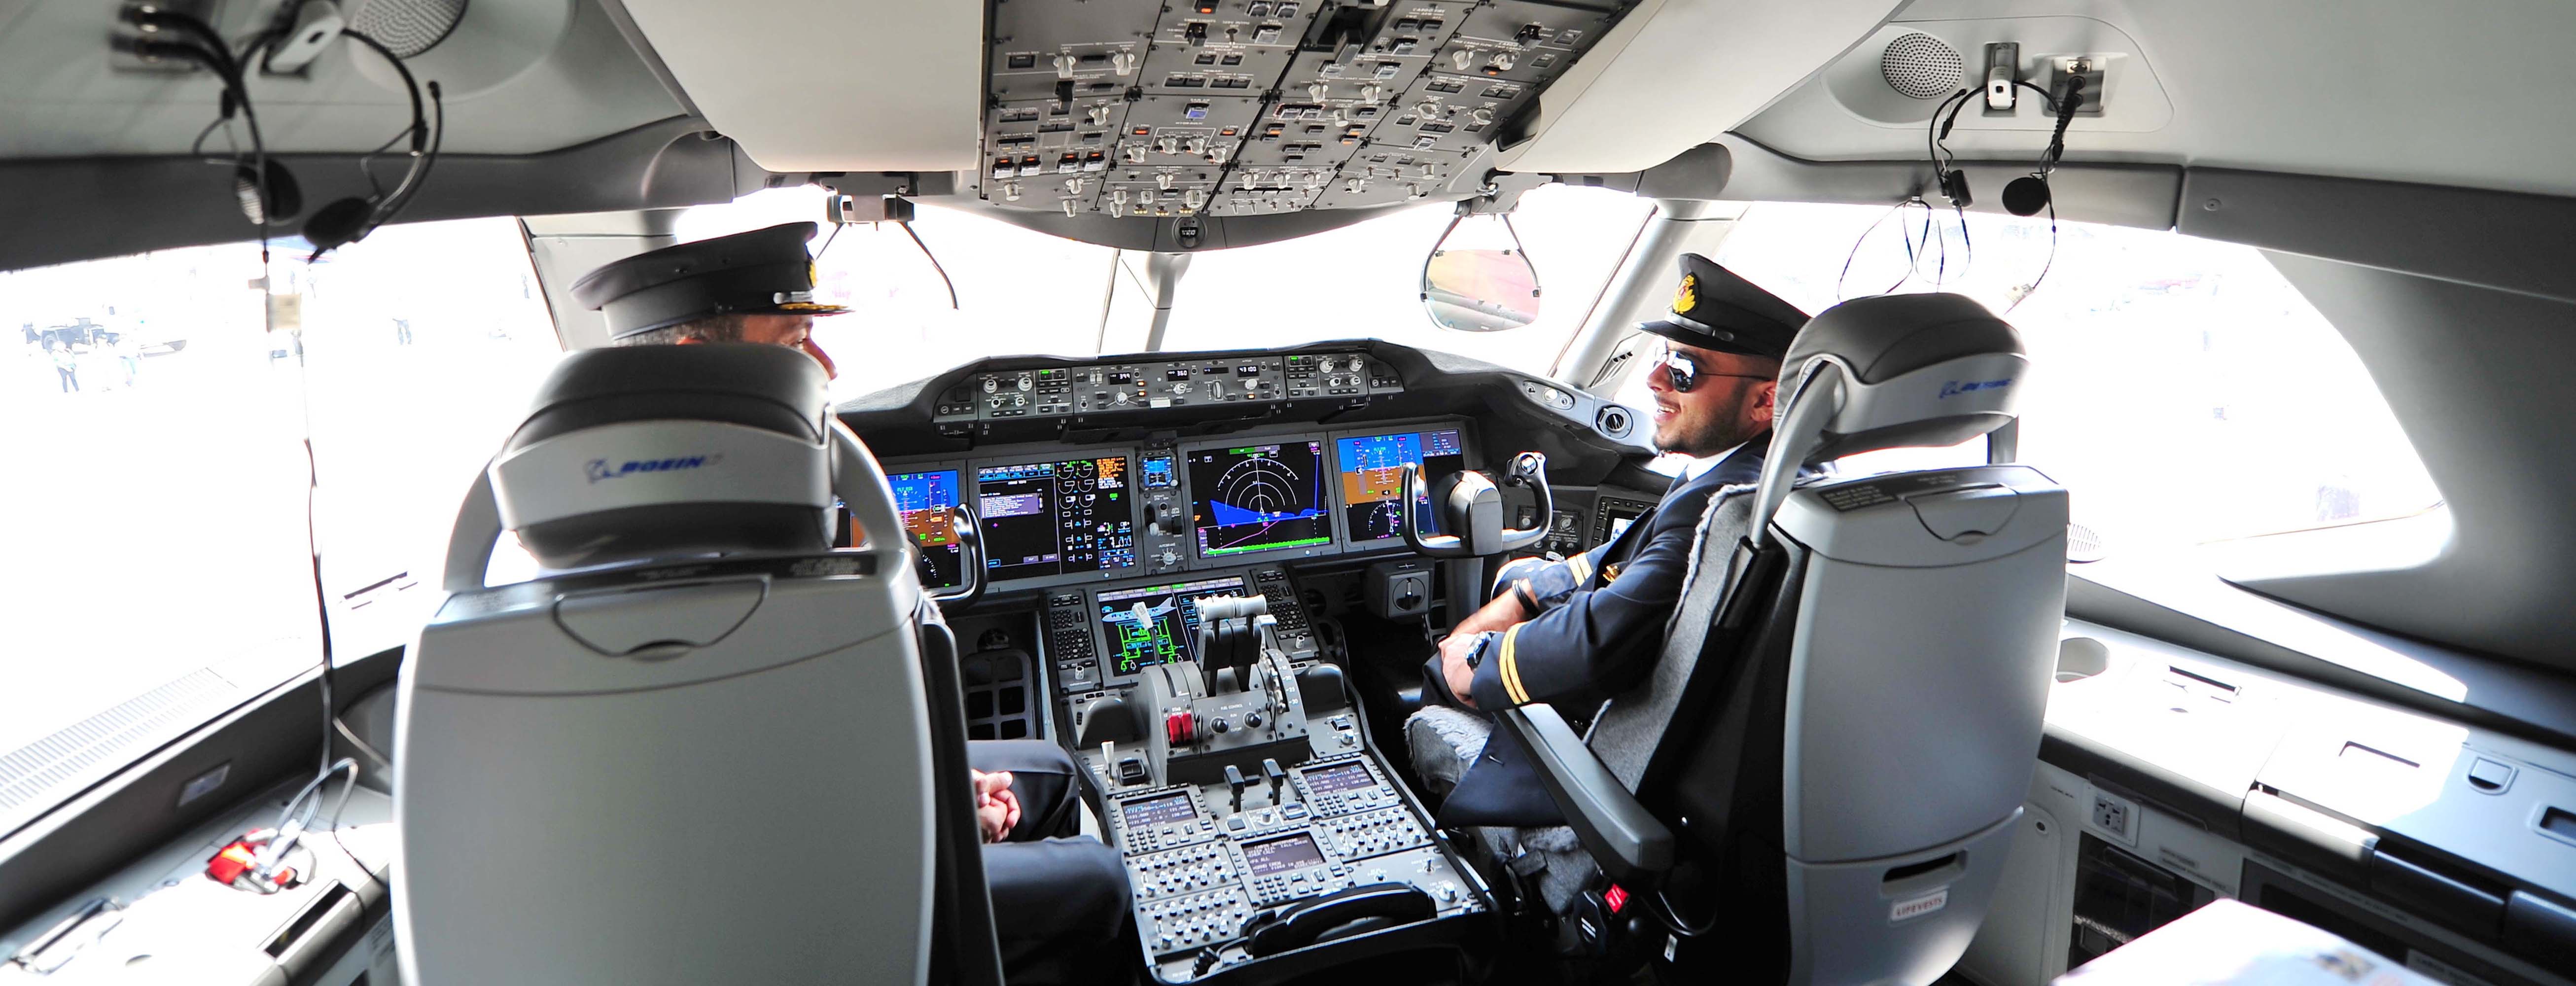 Two pilots in the cockpit talking to each other